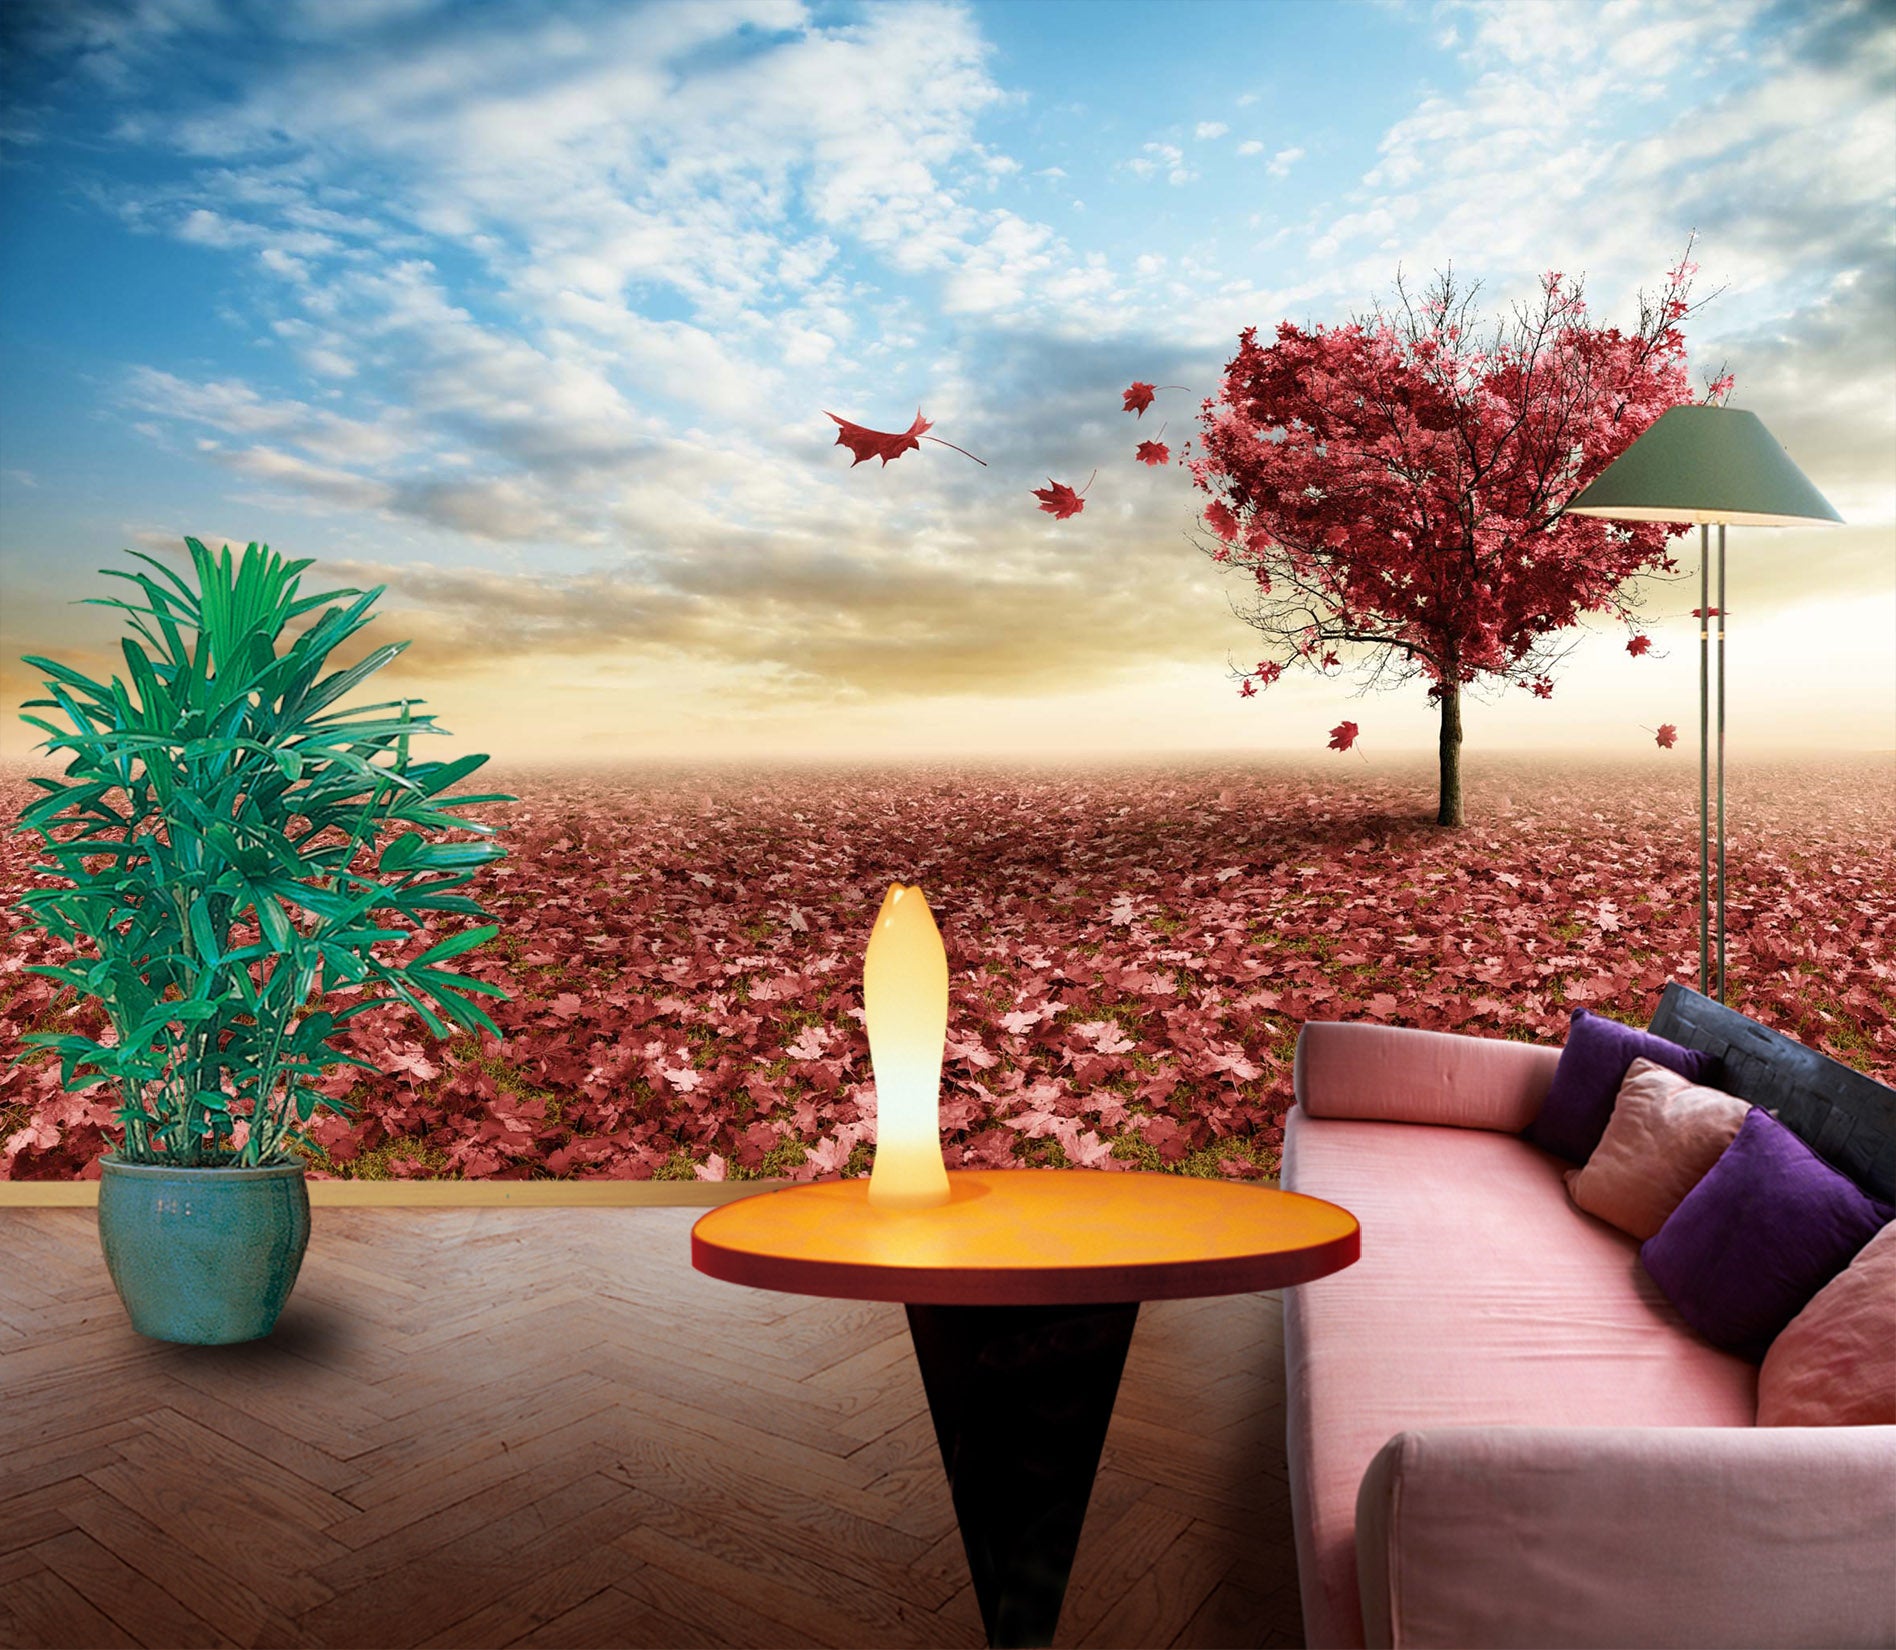 3D Heart Shaped Leaves 1036 Wall Murals